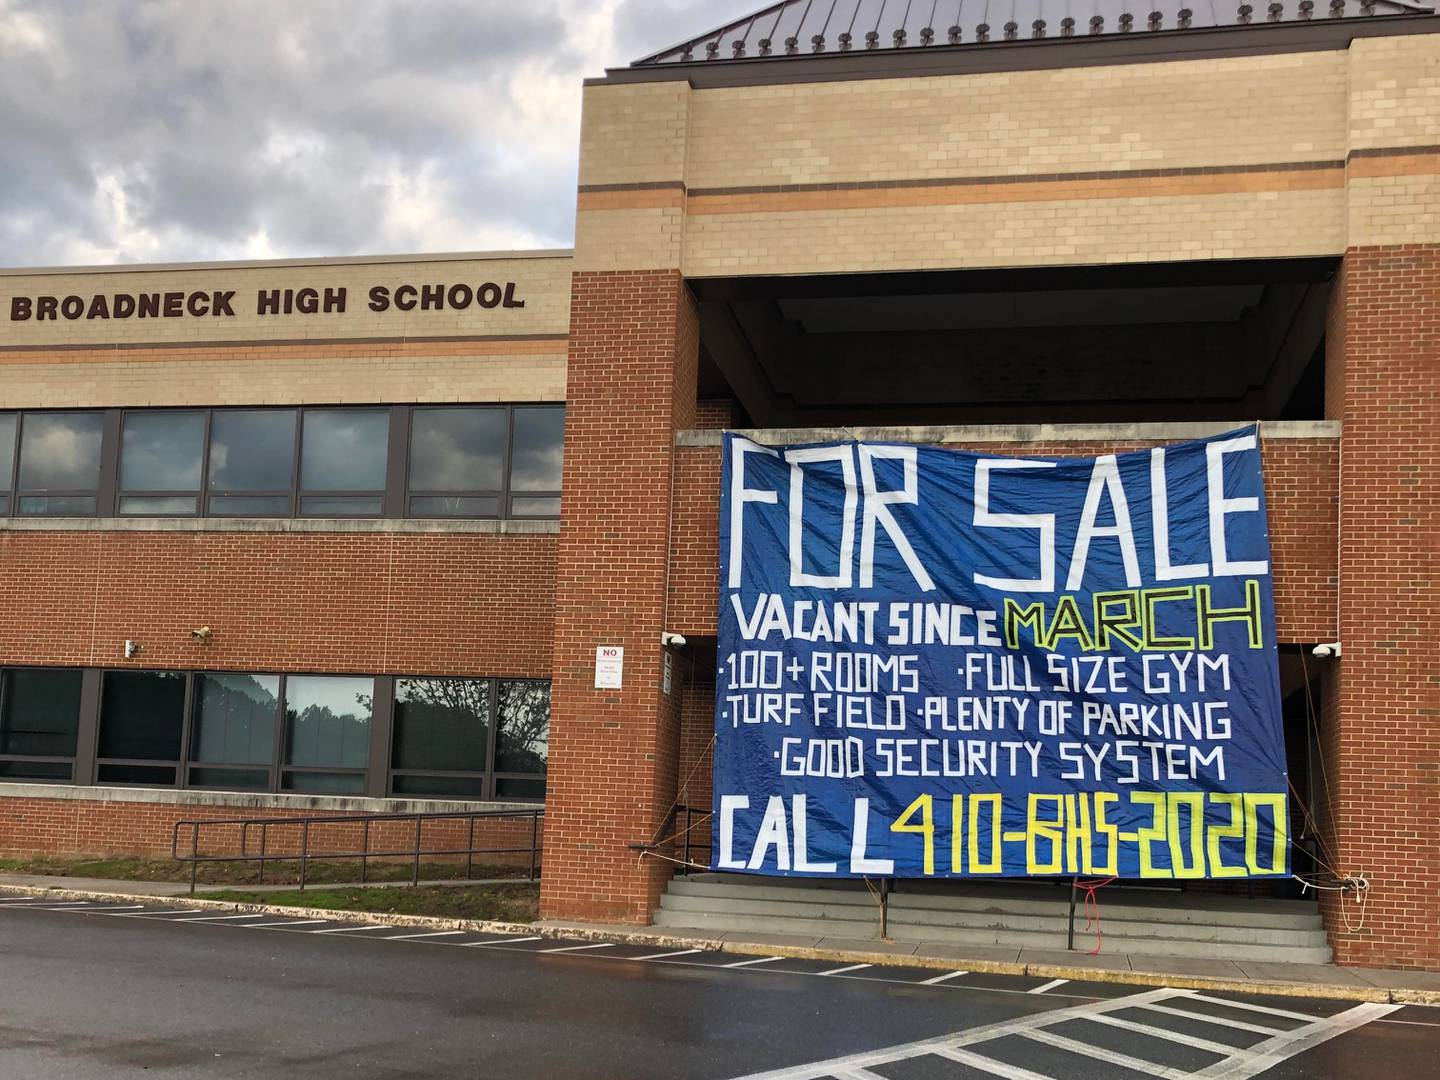 Broadneck High School was listed for sale at the end of the 2019-2020 school year.